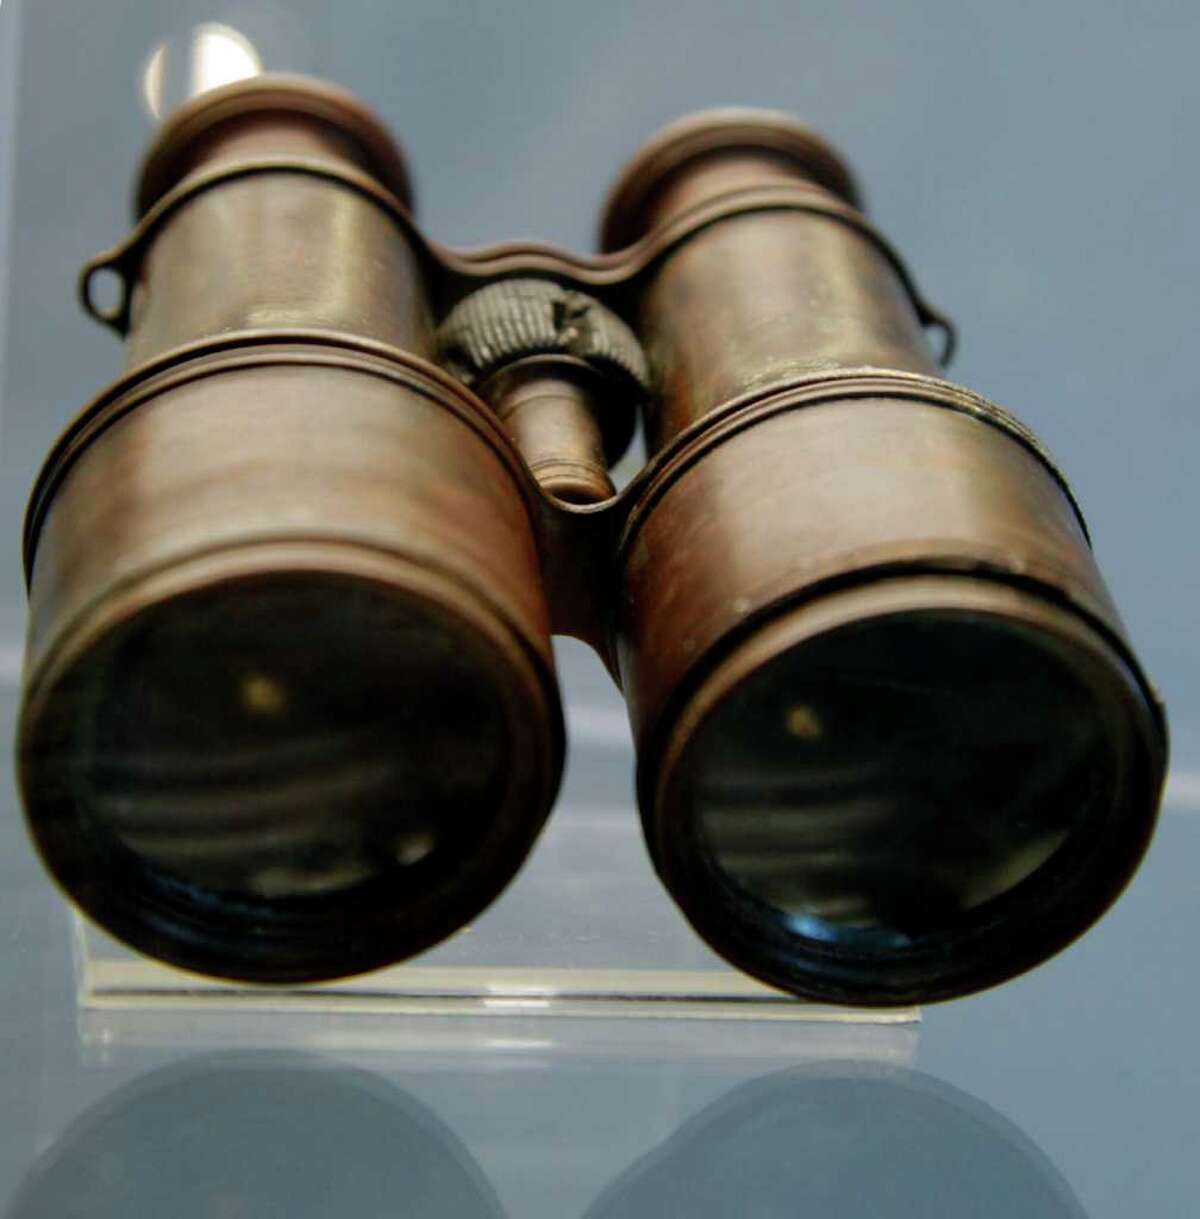 Binoculars found among the debris of the Titanic wreck are part of the collection of artifacts recovered from the wreck site of the RMS Titanic to be auctioned by Guernsey's Auction House in April.